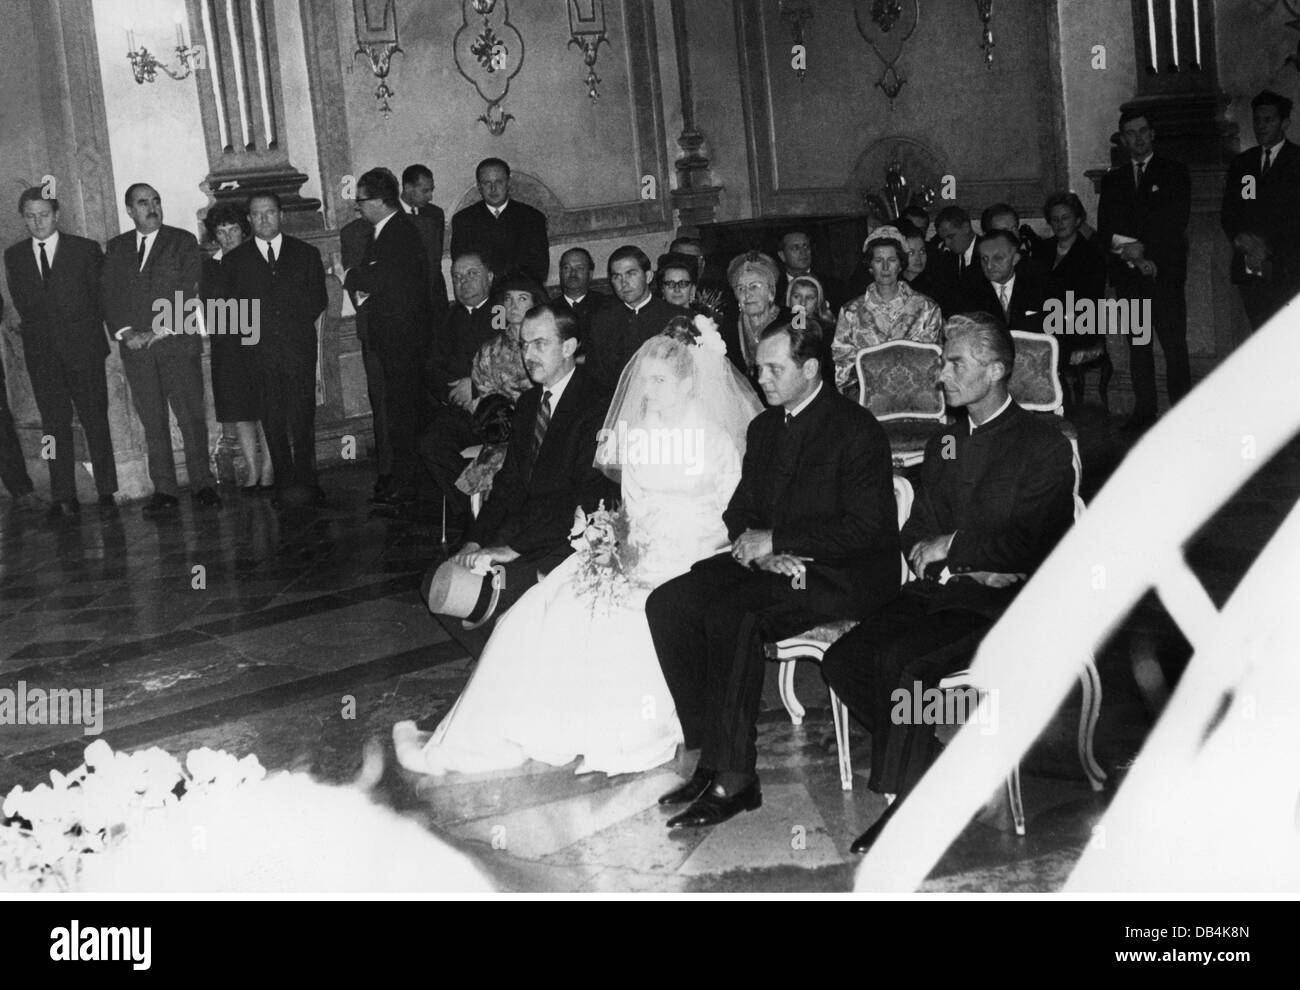 Christian Oskar, 1.9.1919 - 10.12.1981, Prince of Hanover, marriage with Mireille Dutry, civil wedding in the marble hall of Mirabell Palace, Salzburg, 23.11.1963, right prince Ernest Augustus IV of Hanover, Stock Photo